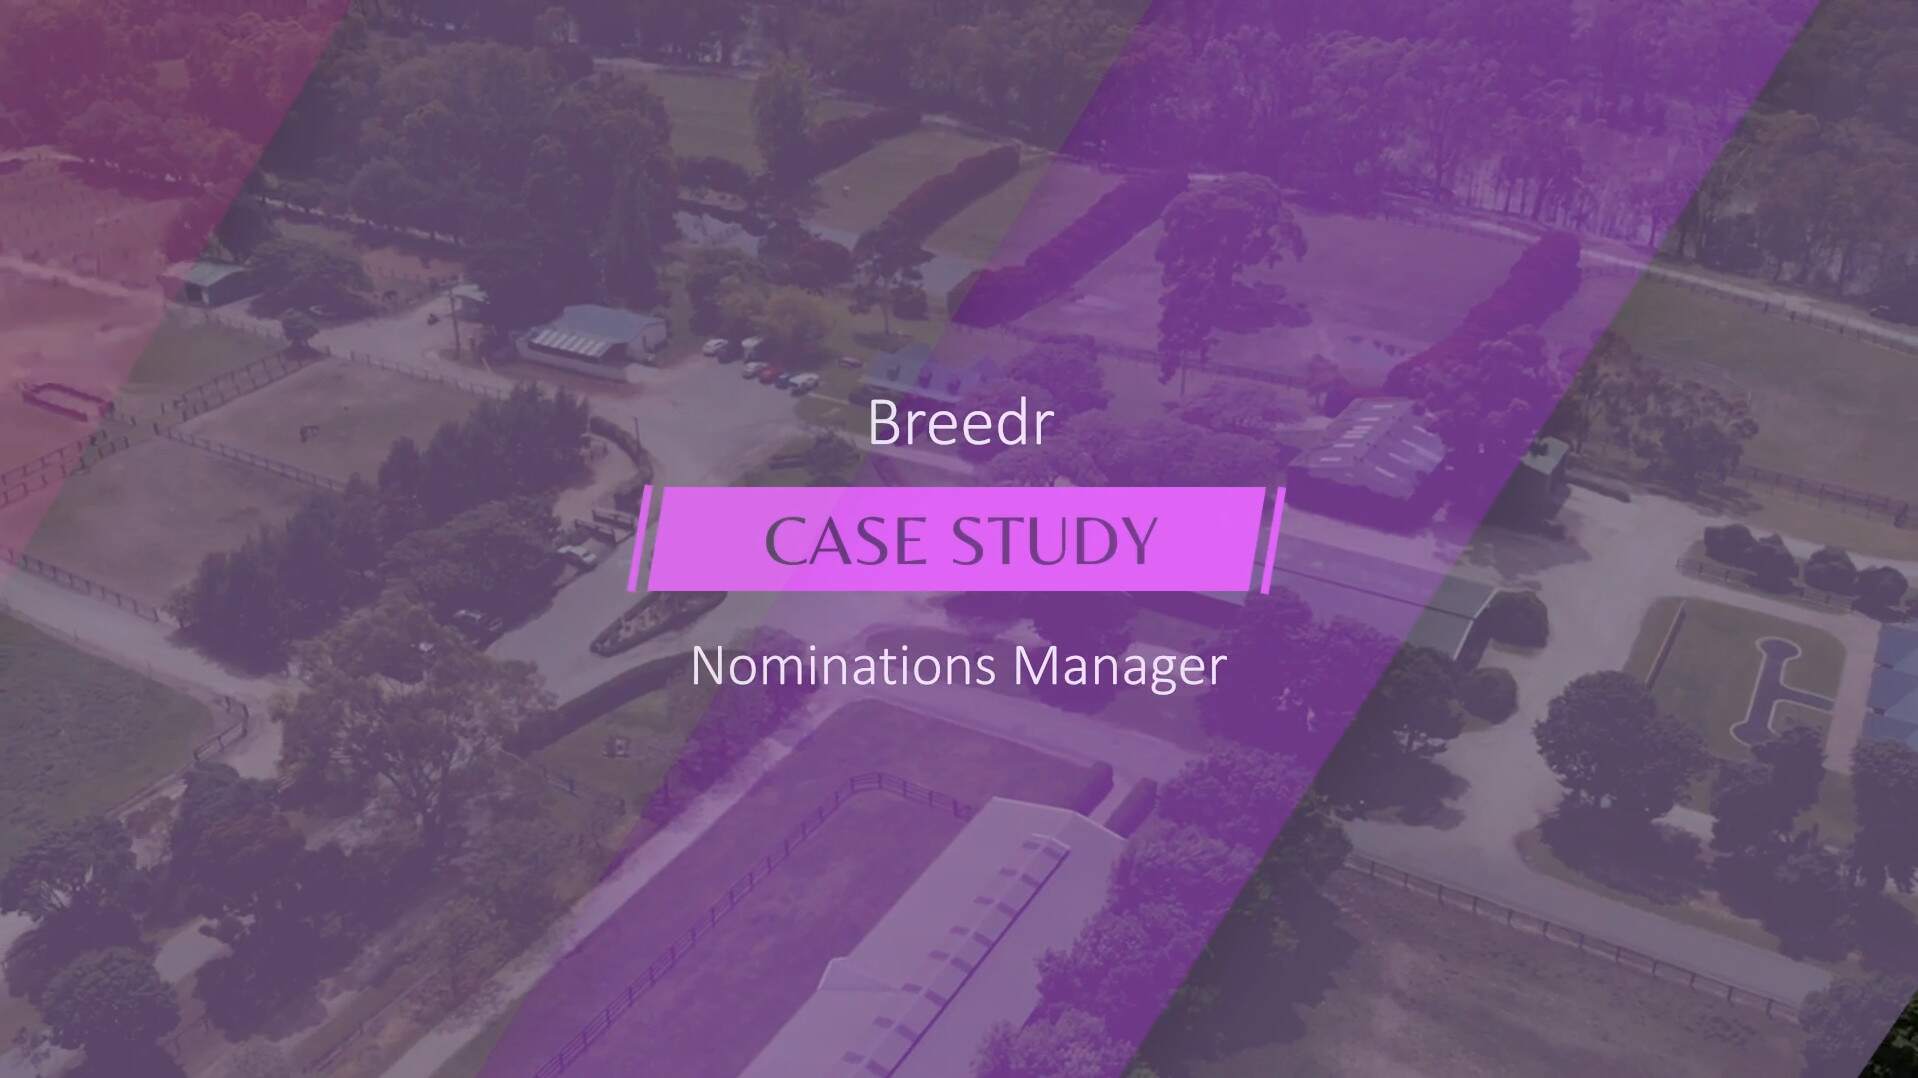 Case study Nominations Manager